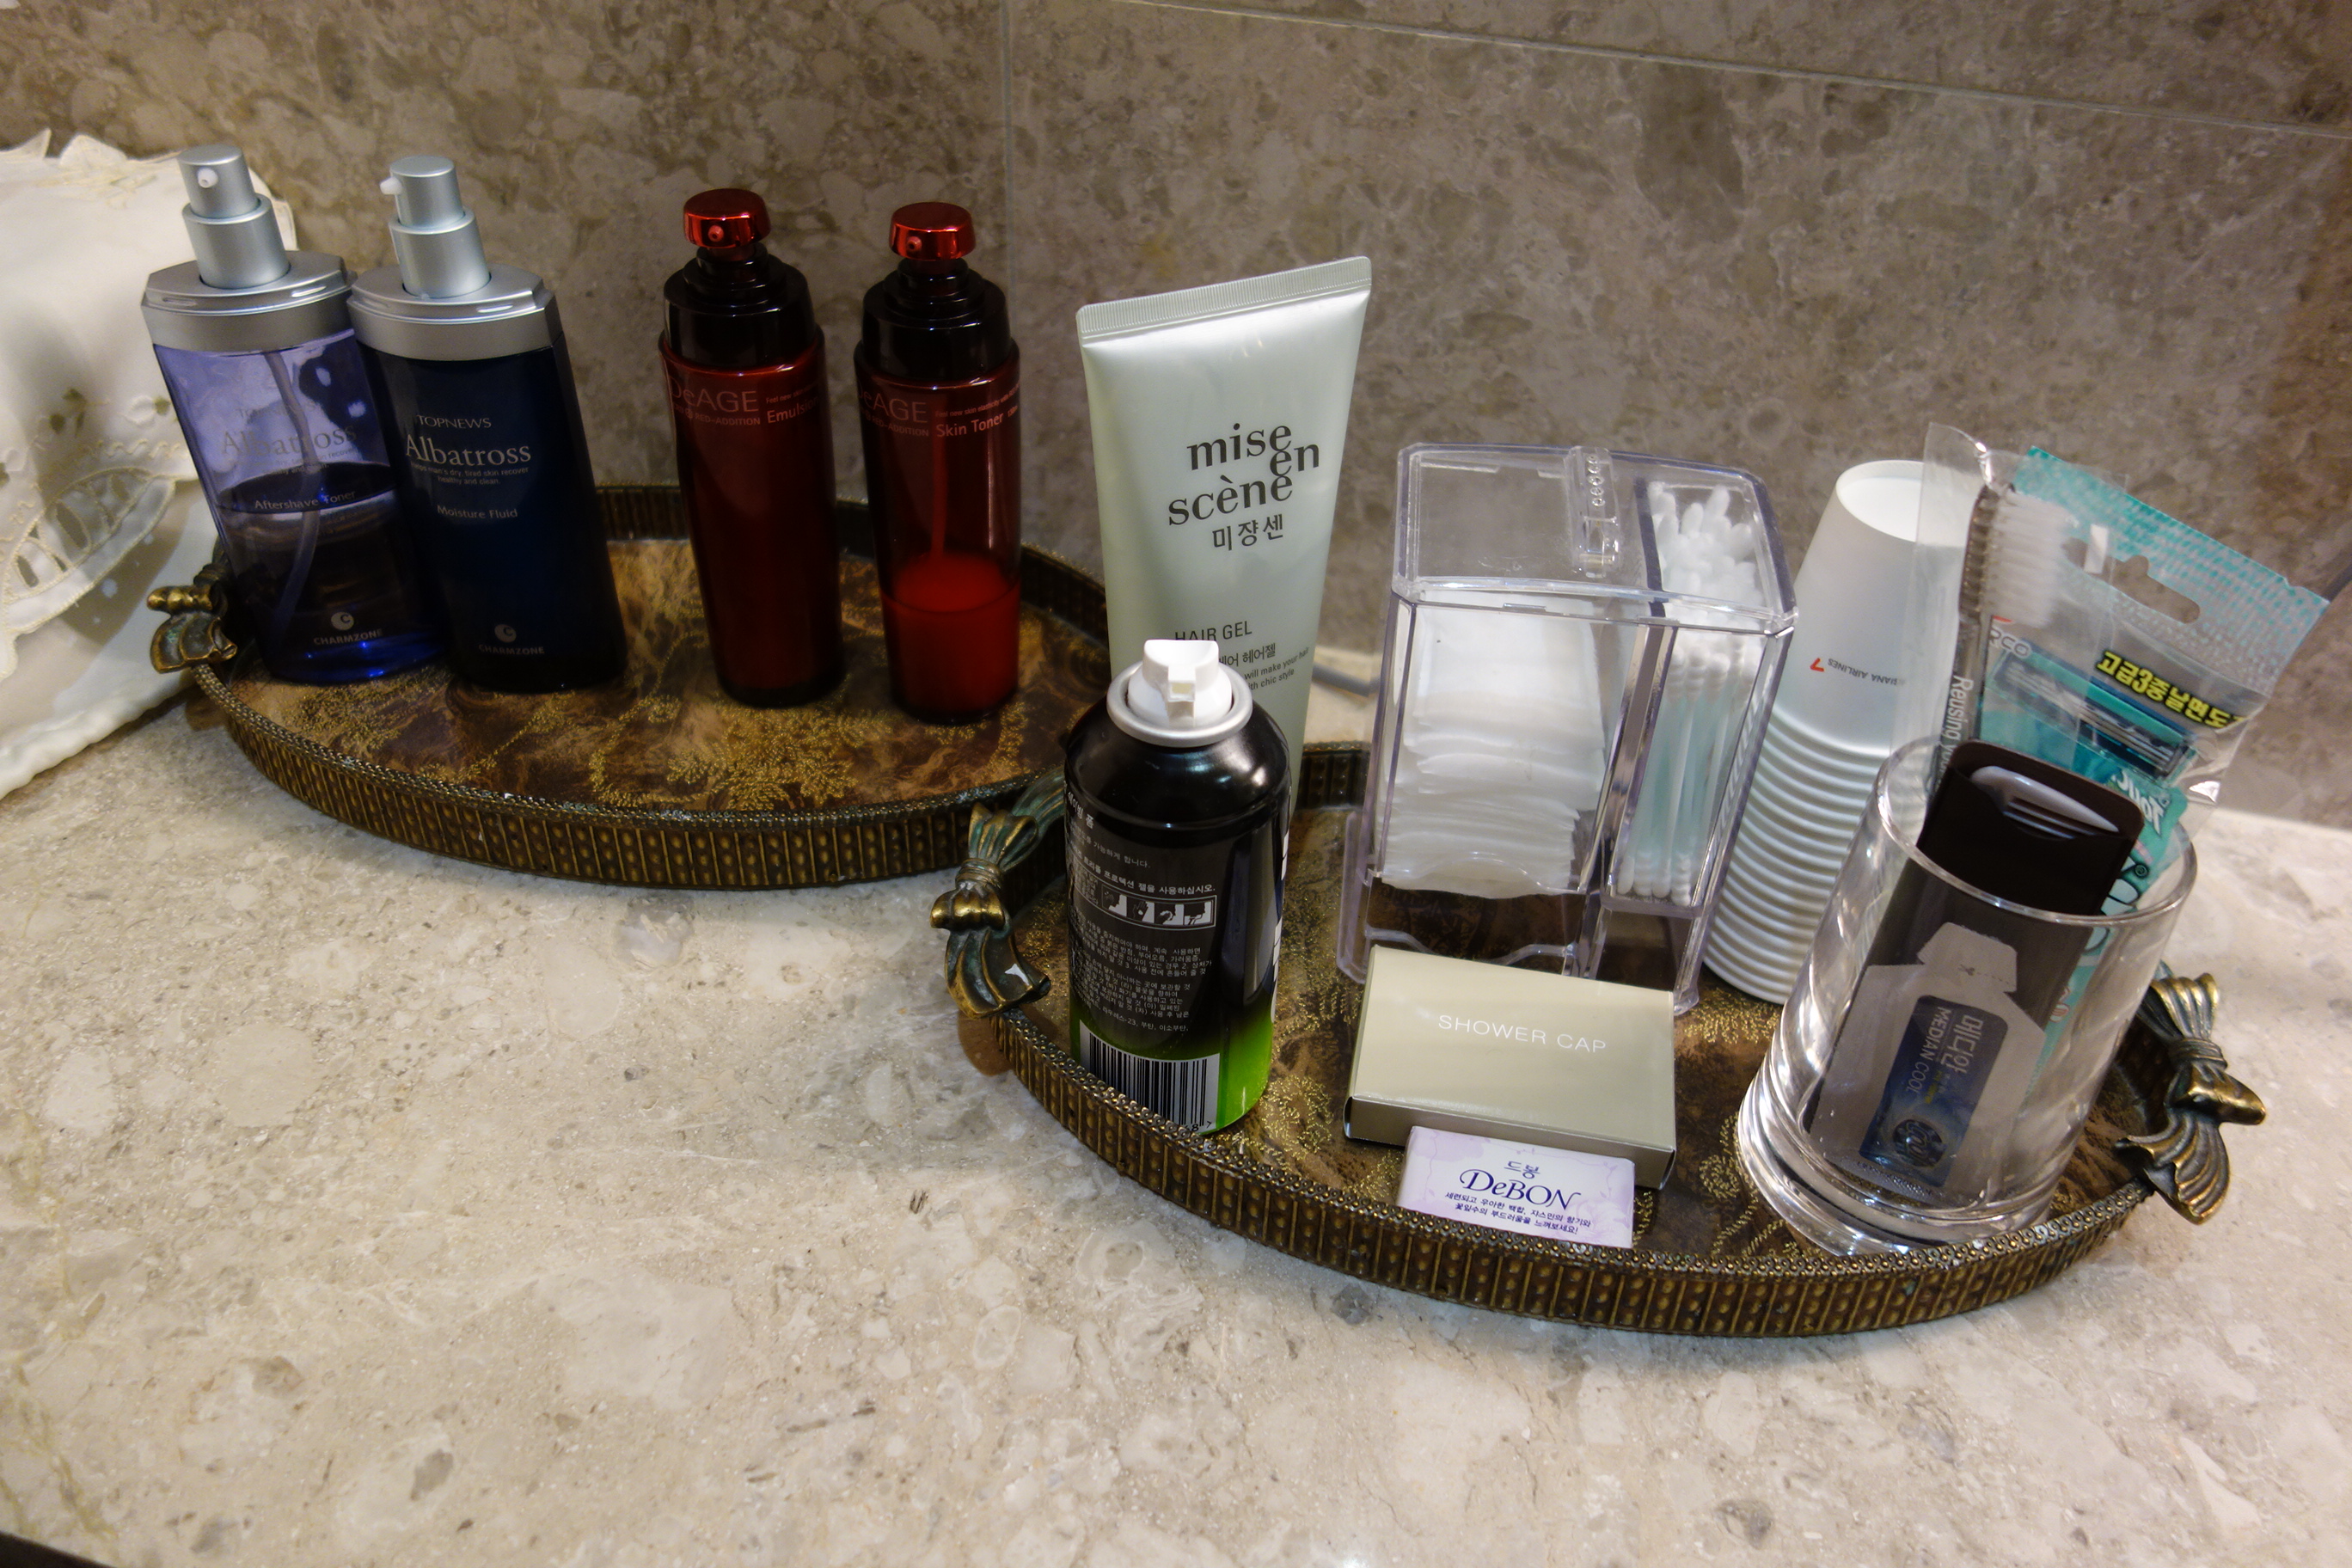 Amenities in the shower rooms